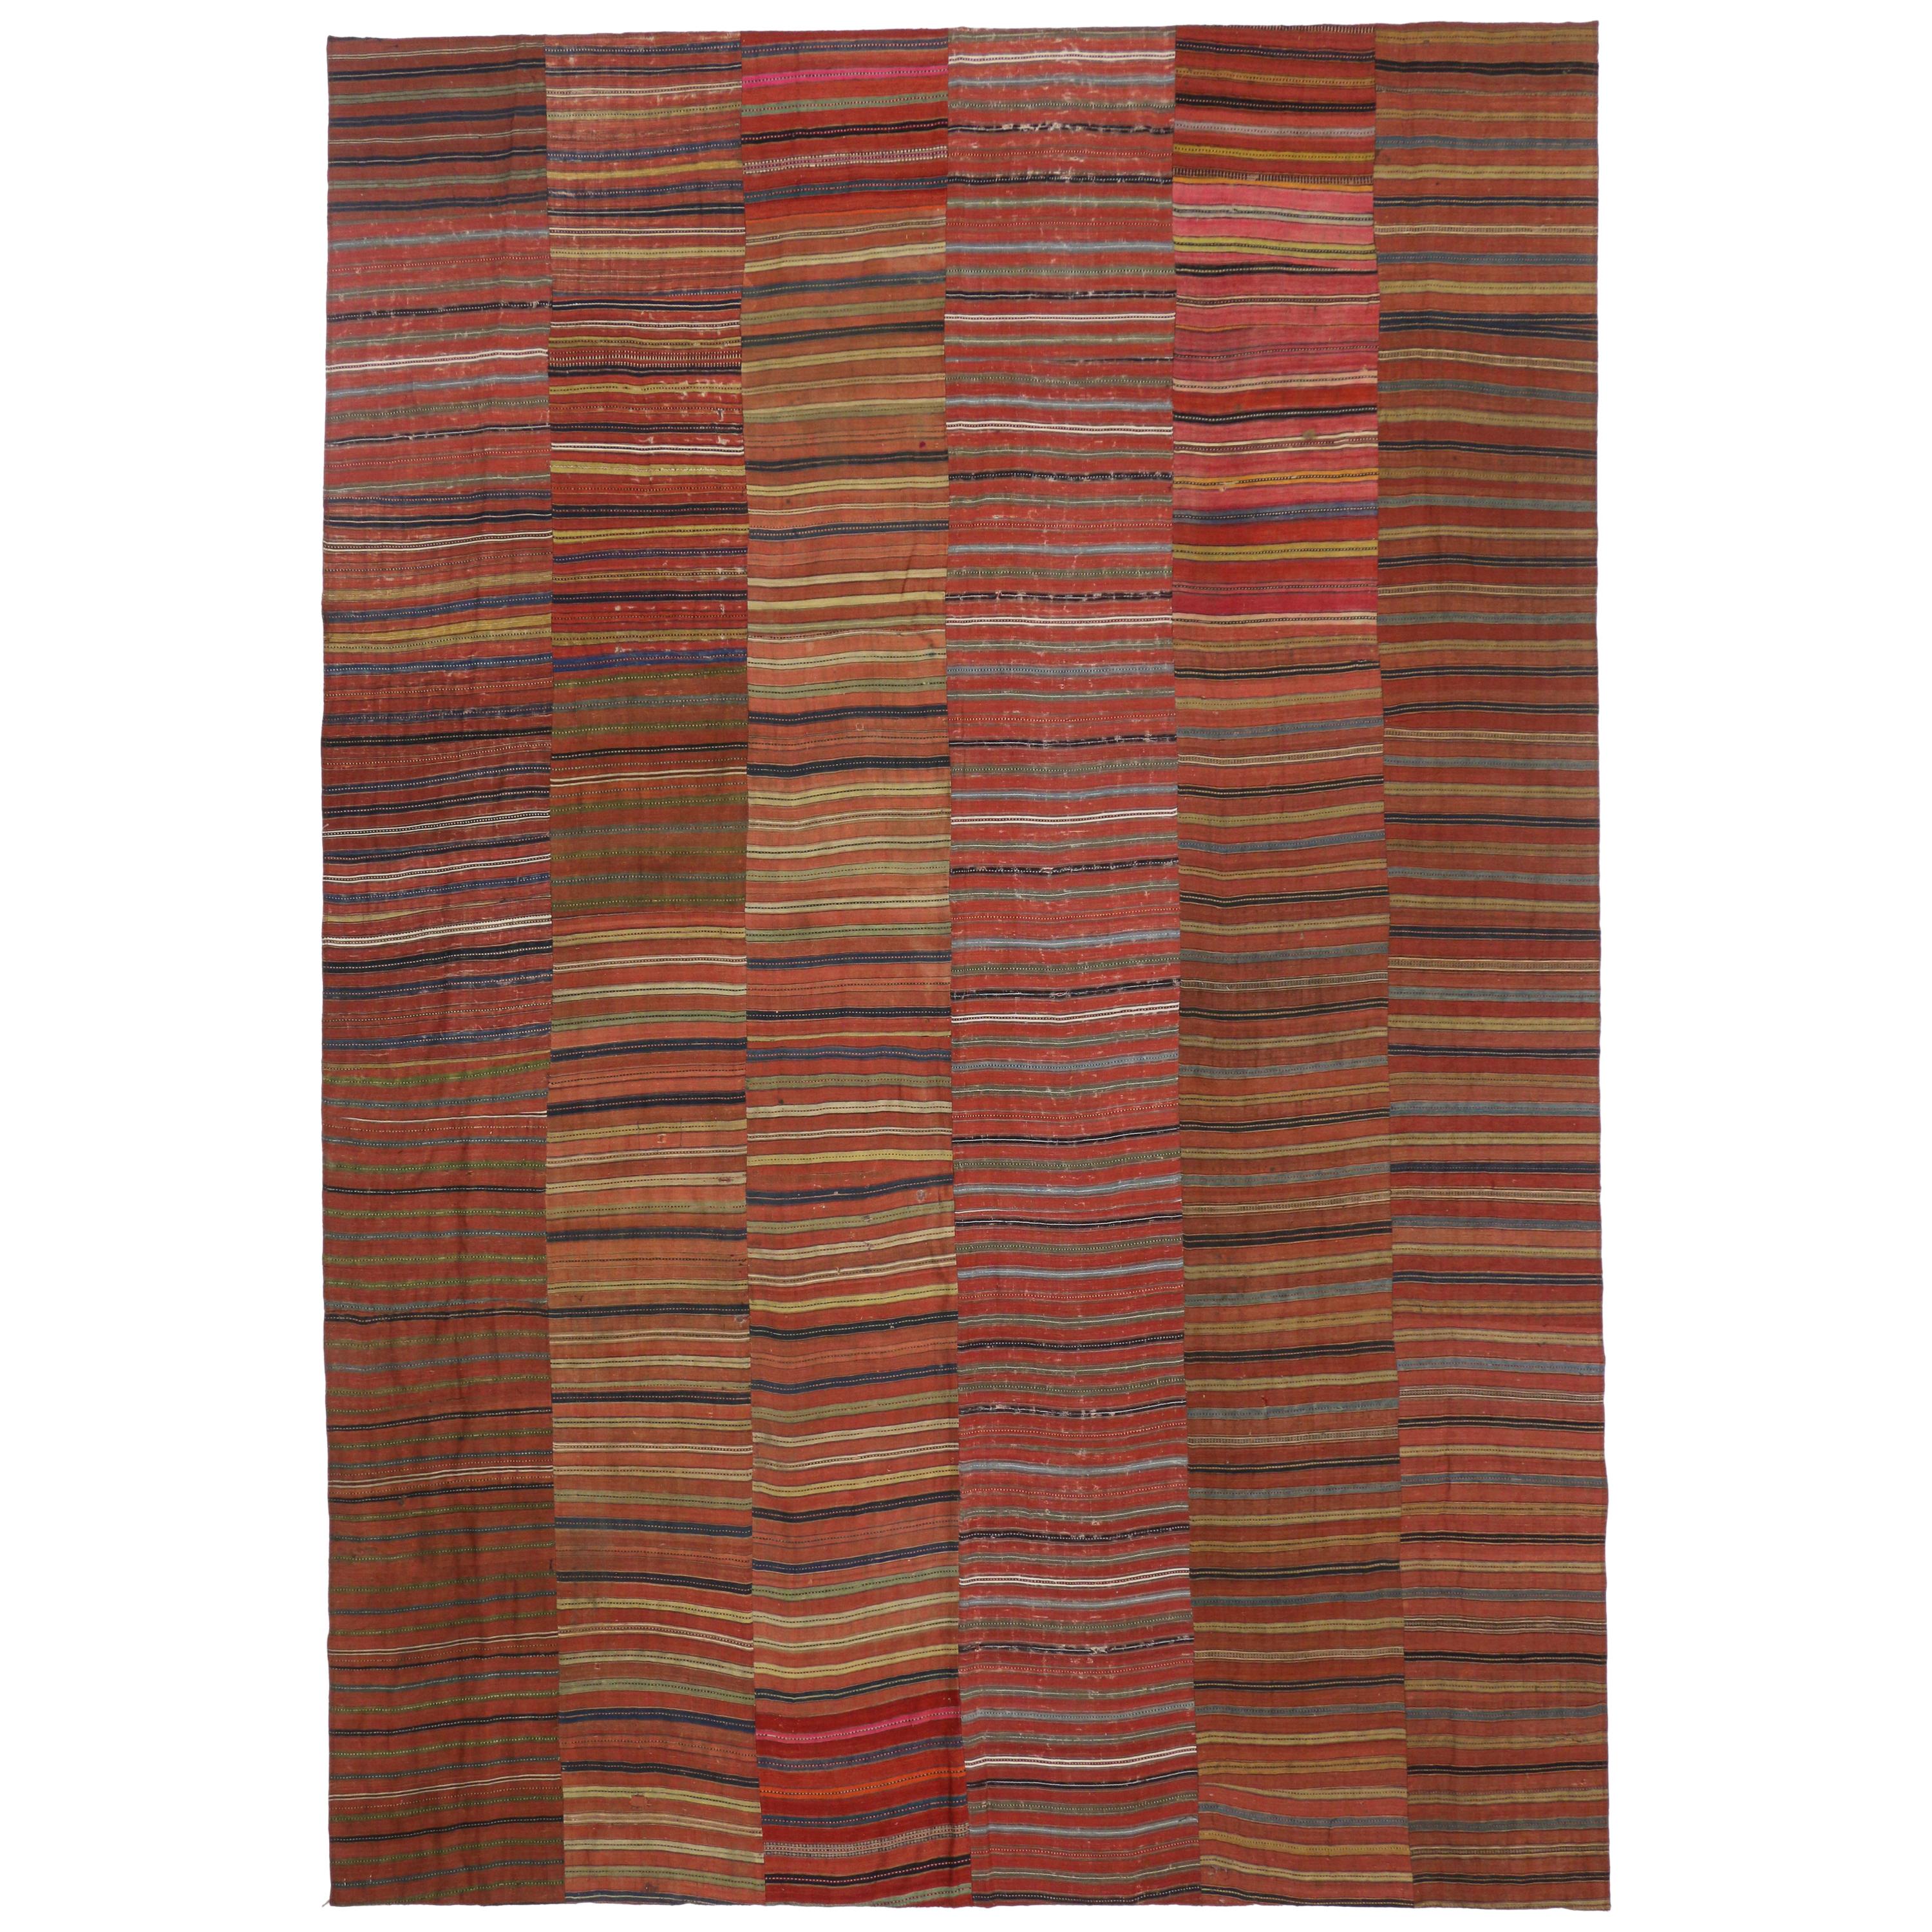 Distressed Vintage Turkish Striped Kilim Rug with Modern Rustic Cabin Style 